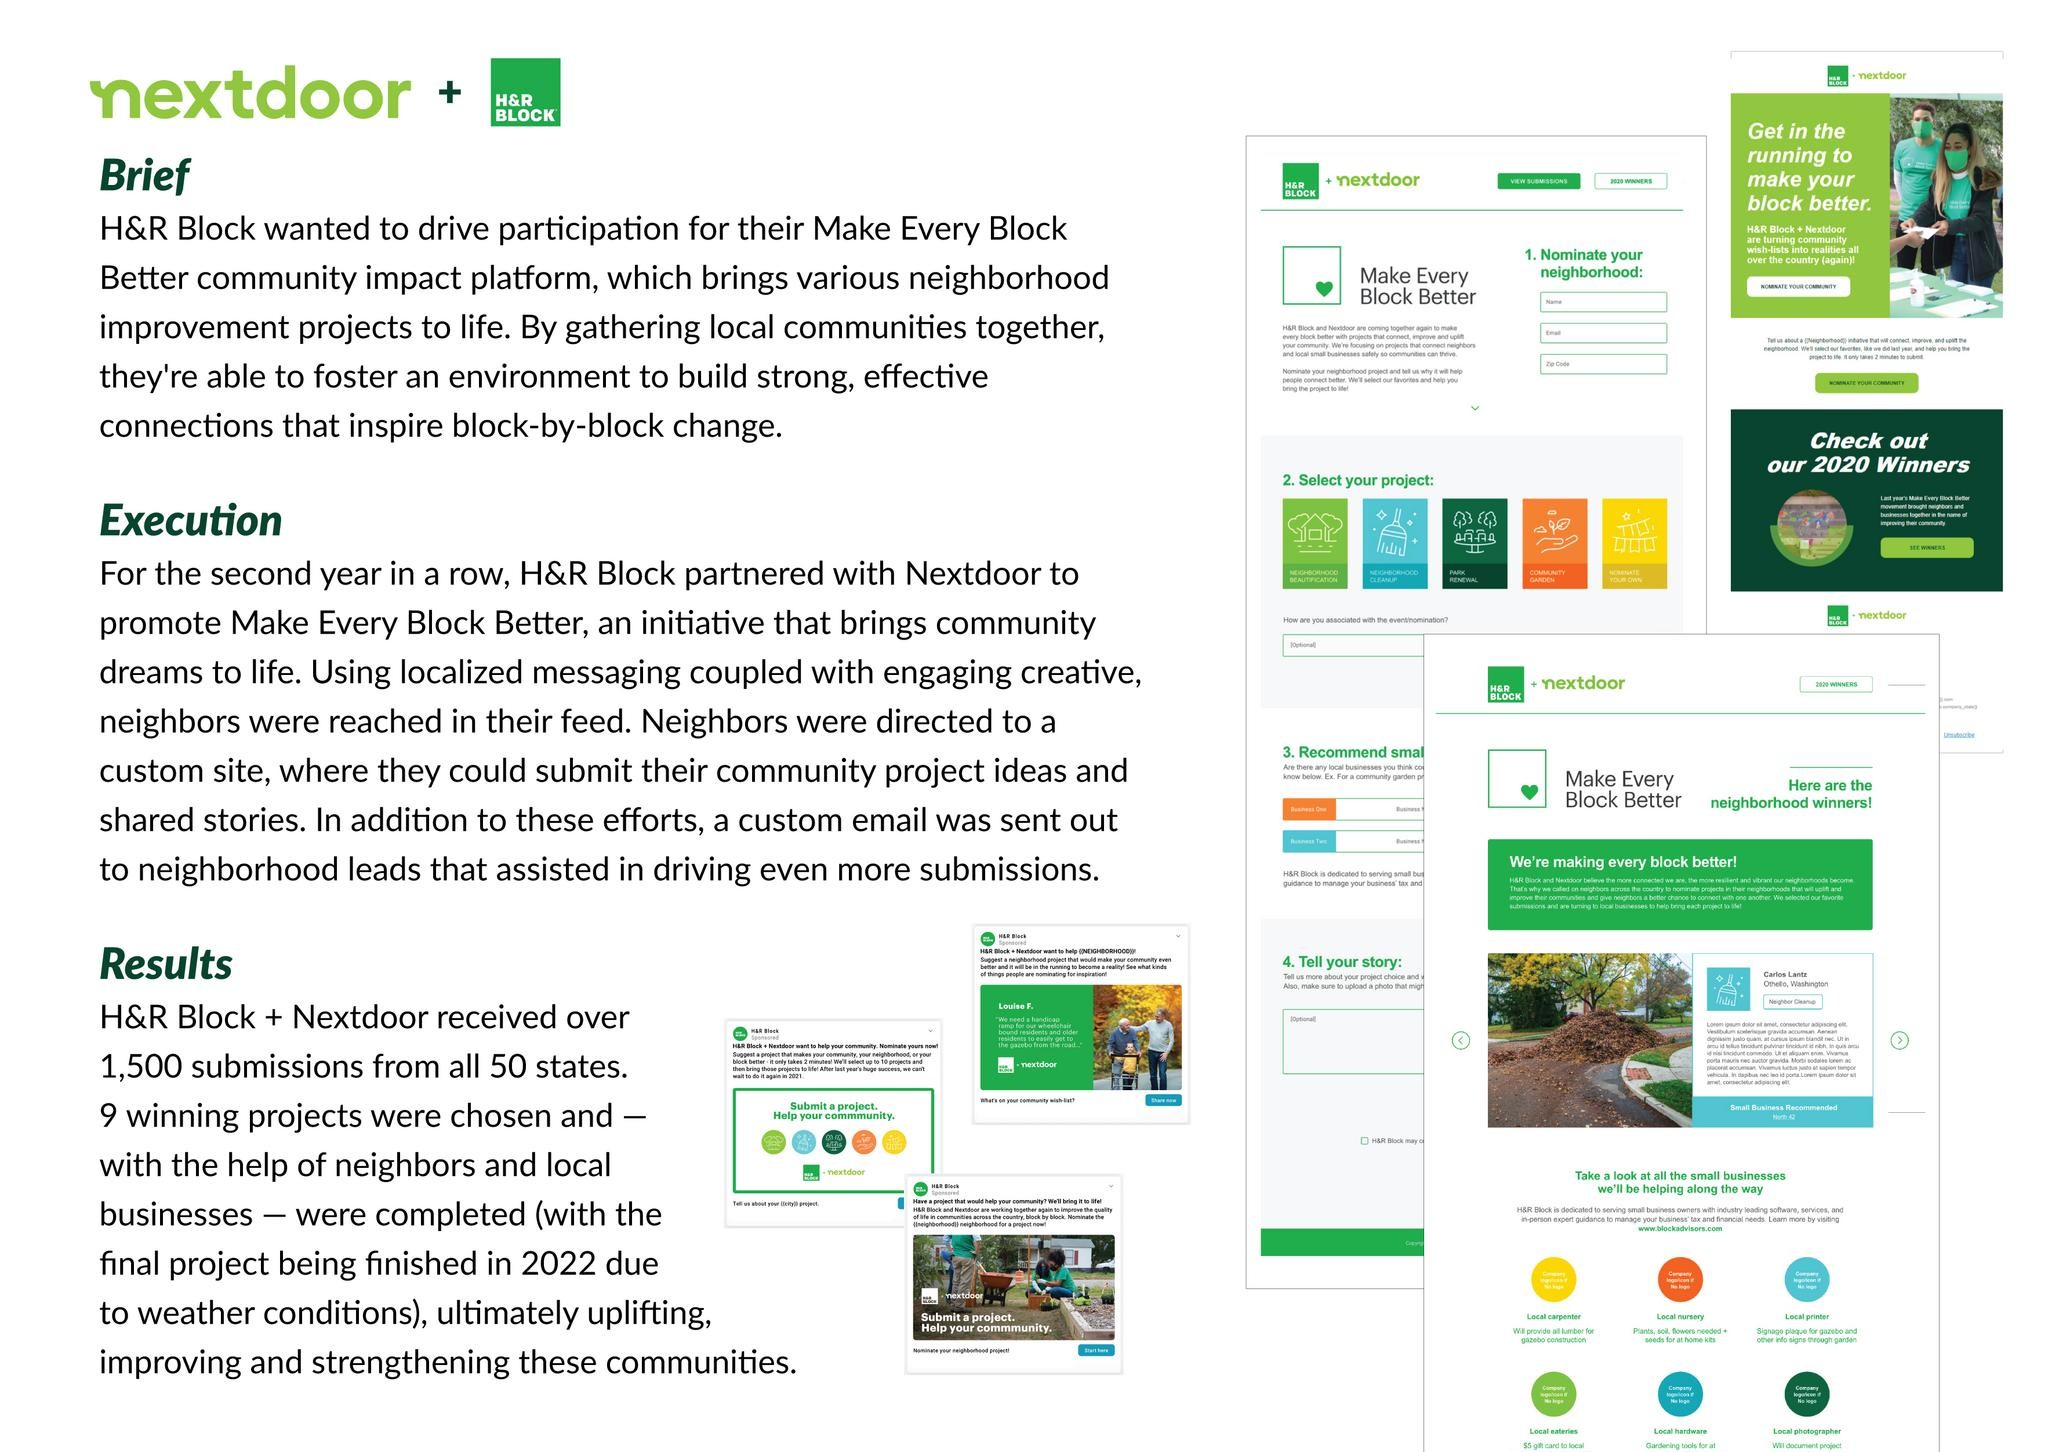 Nextdoor and H&R Block brought neighbors together to improve their communities together